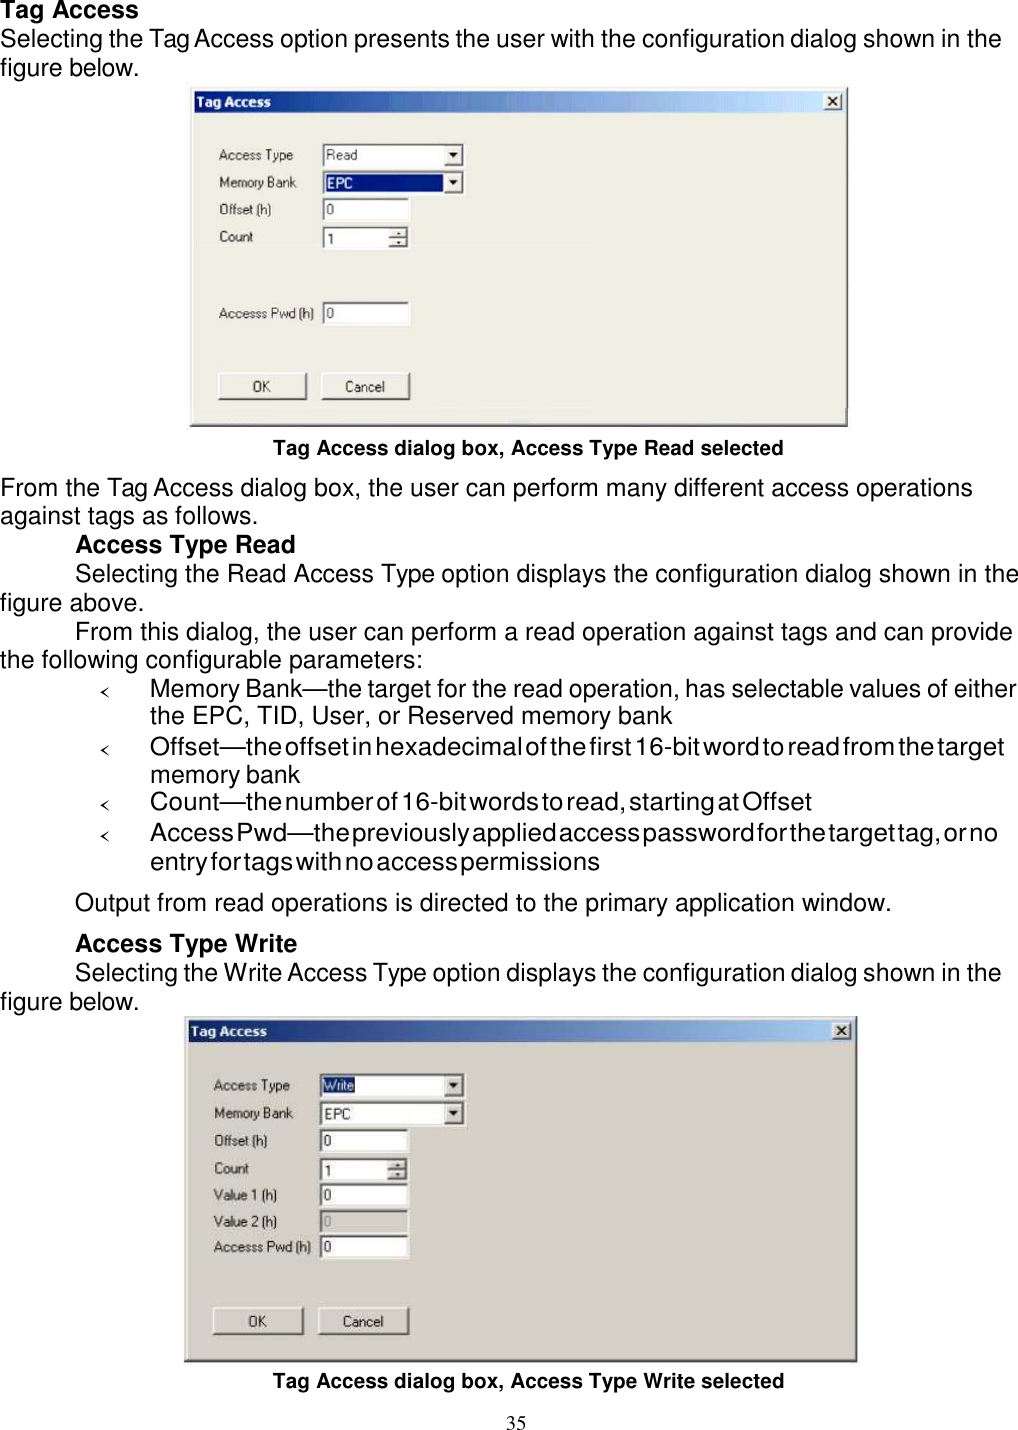 35    Tag Access Selecting the Tag Access option presents the user with the configuration dialog shown in the figure below.  Tag Access dialog box, Access Type Read selected From the Tag Access dialog box, the user can perform many different access operations against tags as follows. Access Type Read Selecting the Read Access Type option displays the configuration dialog shown in the figure above. From this dialog, the user can perform a read operation against tags and can provide the following configurable parameters: ‹ Memory Bank—the target for the read operation, has selectable values of either the EPC, TID, User, or Reserved memory bank ‹ Offset—the offset in hexadecimal of the first 16-bit word to read from the target memory bank ‹ Count—the number of 16-bit words to read, starting at Offset ‹ Access Pwd—the previously applied access password for the target tag, or no entry for tags with no access permissions Output from read operations is directed to the primary application window. Access Type Write Selecting the Write Access Type option displays the configuration dialog shown in the figure below.  Tag Access dialog box, Access Type Write selected 